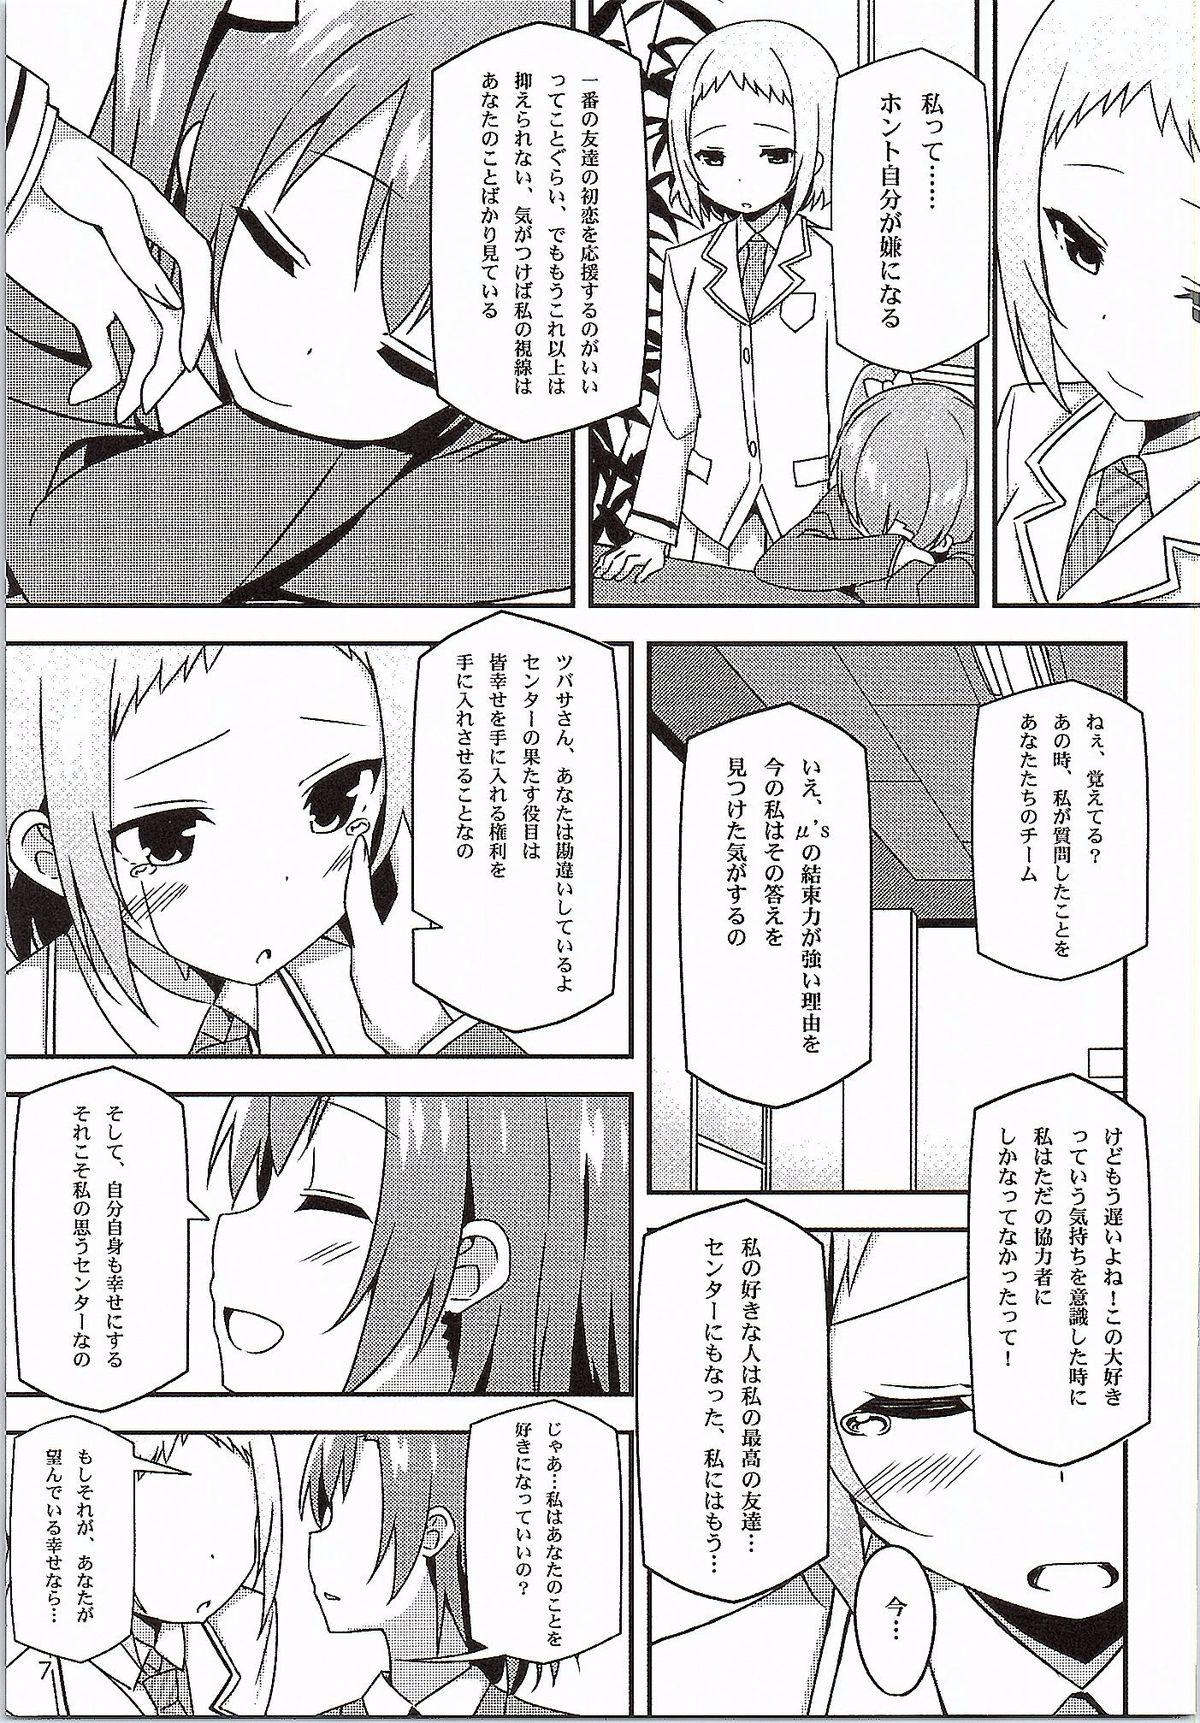 Dicksucking Endless Love - Love live Love Making - Page 6